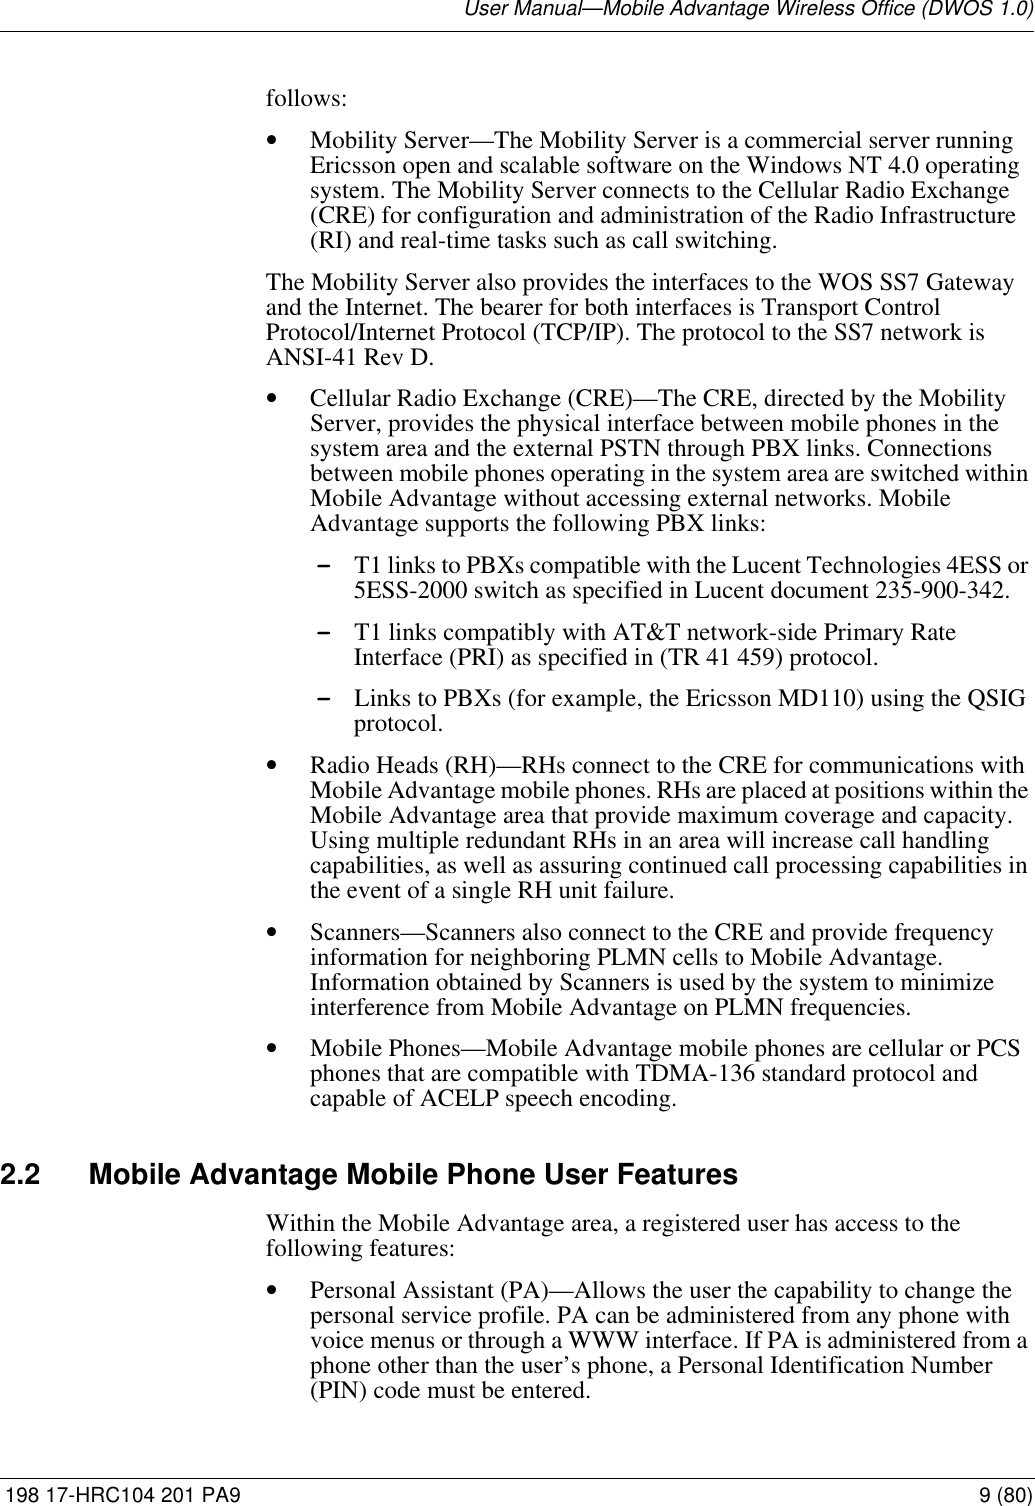 User Manual—Mobile Advantage Wireless Office (DWOS 1.0) 198 17-HRC104 201 PA9 9 (80)follows:•Mobility Server—The Mobility Server is a commercial server running Ericsson open and scalable software on the Windows NT 4.0 operating system. The Mobility Server connects to the Cellular Radio Exchange (CRE) for configuration and administration of the Radio Infrastructure (RI) and real-time tasks such as call switching. The Mobility Server also provides the interfaces to the WOS SS7 Gateway and the Internet. The bearer for both interfaces is Transport Control Protocol/Internet Protocol (TCP/IP). The protocol to the SS7 network is ANSI-41 Rev D.•Cellular Radio Exchange (CRE)—The CRE, directed by the Mobility Server, provides the physical interface between mobile phones in the system area and the external PSTN through PBX links. Connections between mobile phones operating in the system area are switched within Mobile Advantage without accessing external networks. Mobile Advantage supports the following PBX links:-T1 links to PBXs compatible with the Lucent Technologies 4ESS or 5ESS-2000 switch as specified in Lucent document 235-900-342. -T1 links compatibly with AT&amp;T network-side Primary Rate Interface (PRI) as specified in (TR 41 459) protocol.-Links to PBXs (for example, the Ericsson MD110) using the QSIG protocol. •Radio Heads (RH)—RHs connect to the CRE for communications with Mobile Advantage mobile phones. RHs are placed at positions within the Mobile Advantage area that provide maximum coverage and capacity. Using multiple redundant RHs in an area will increase call handling capabilities, as well as assuring continued call processing capabilities in the event of a single RH unit failure. •Scanners—Scanners also connect to the CRE and provide frequency information for neighboring PLMN cells to Mobile Advantage. Information obtained by Scanners is used by the system to minimize interference from Mobile Advantage on PLMN frequencies.•Mobile Phones—Mobile Advantage mobile phones are cellular or PCS phones that are compatible with TDMA-136 standard protocol and capable of ACELP speech encoding.2.2 Mobile Advantage Mobile Phone User FeaturesWithin the Mobile Advantage area, a registered user has access to the following features: •Personal Assistant (PA)—Allows the user the capability to change the personal service profile. PA can be administered from any phone with voice menus or through a WWW interface. If PA is administered from a phone other than the user’s phone, a Personal Identification Number (PIN) code must be entered.